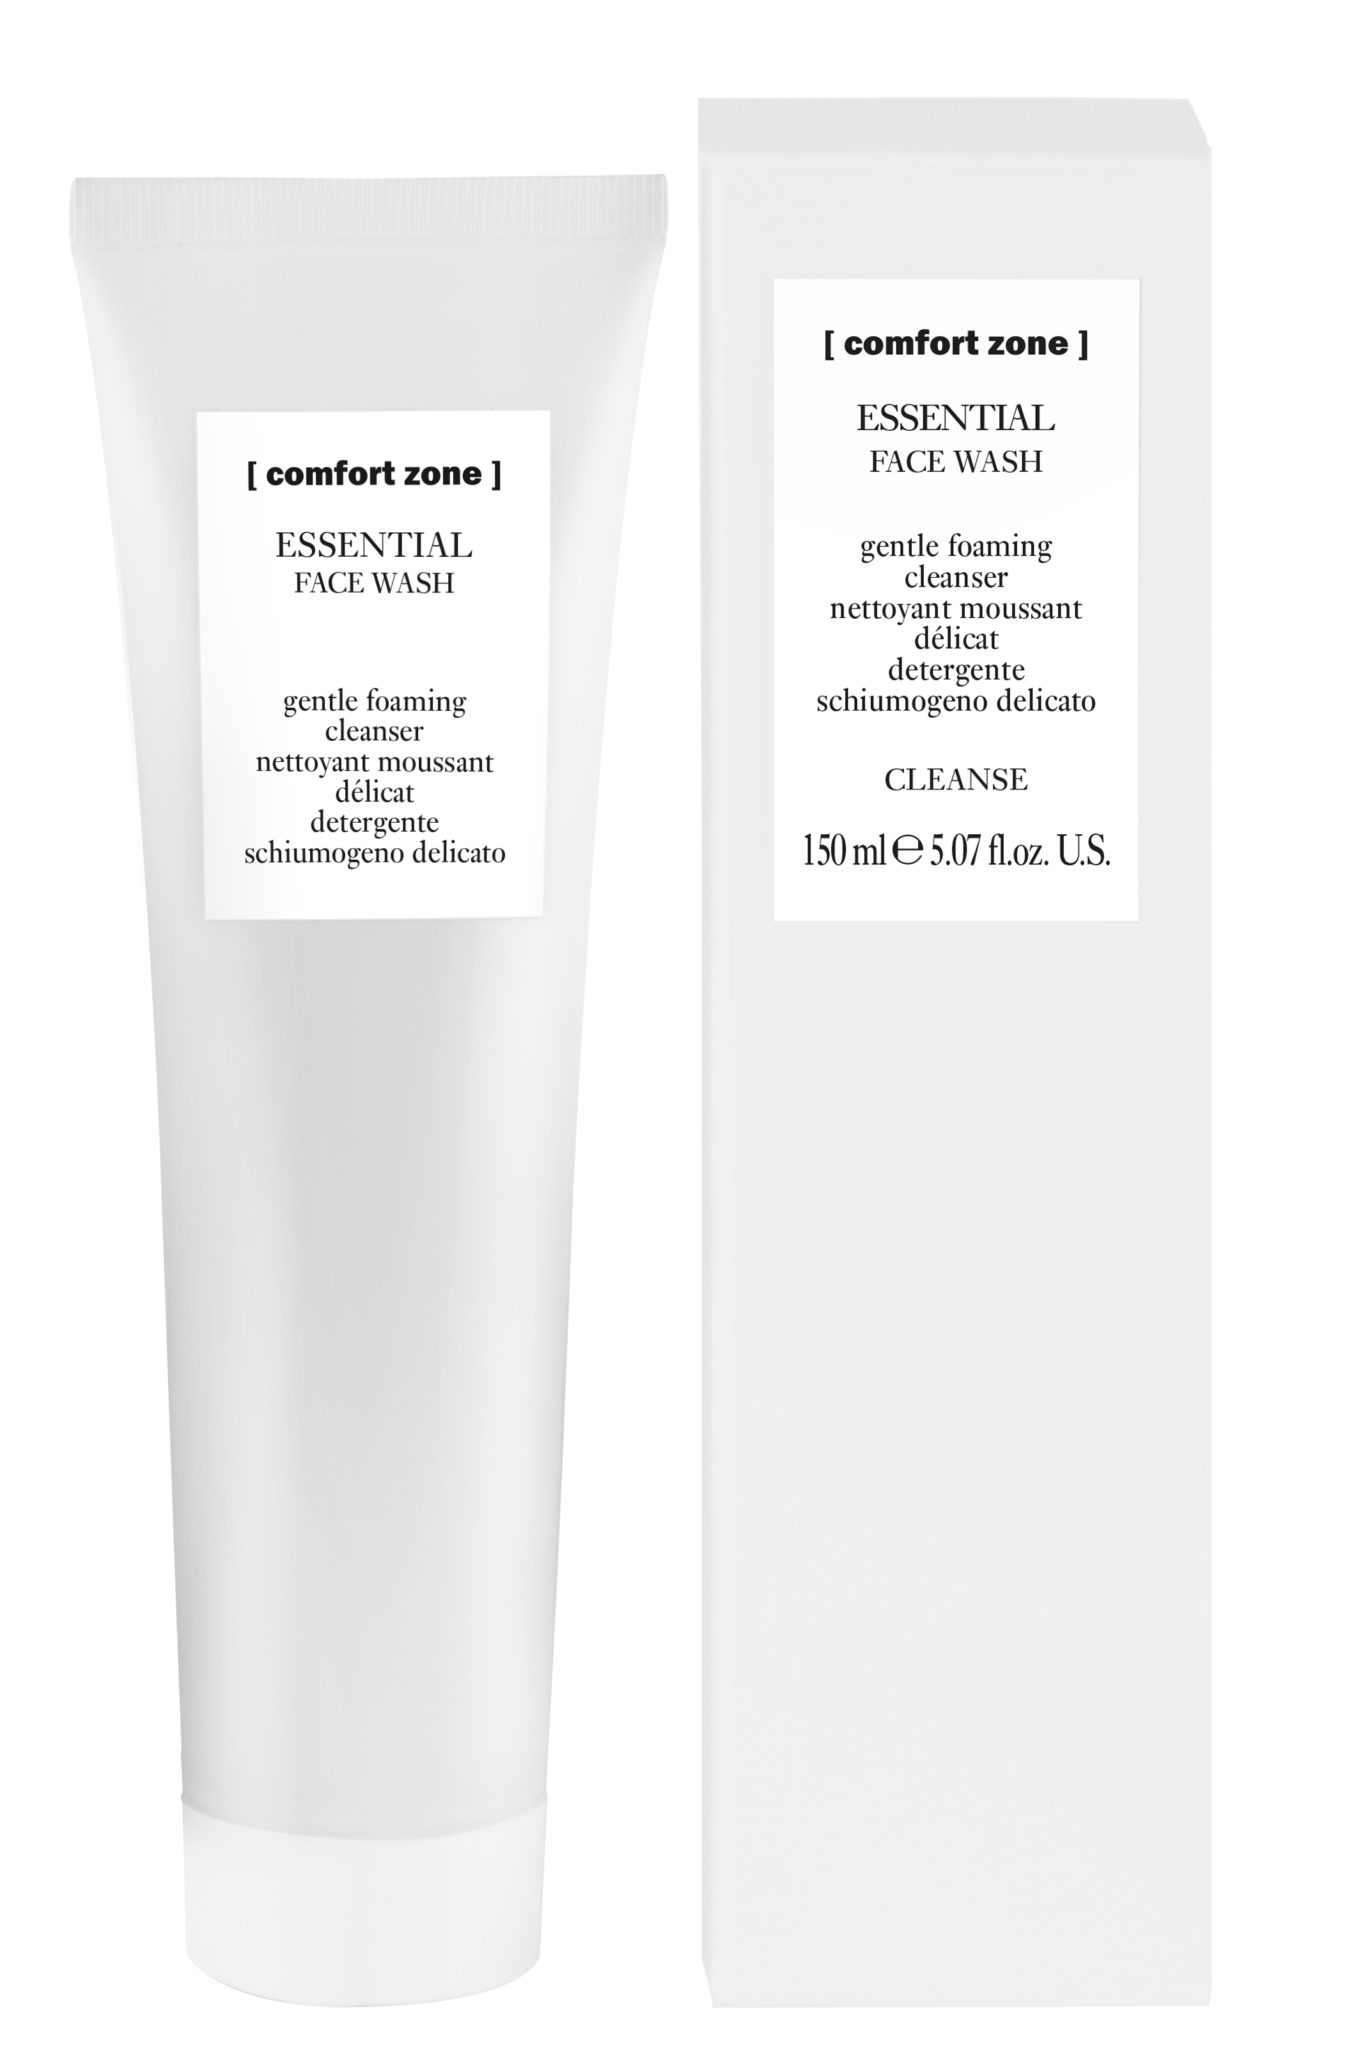 Comfort Zone ESSENTIAL FACE WASH 150ml- gentle foaming cleanser